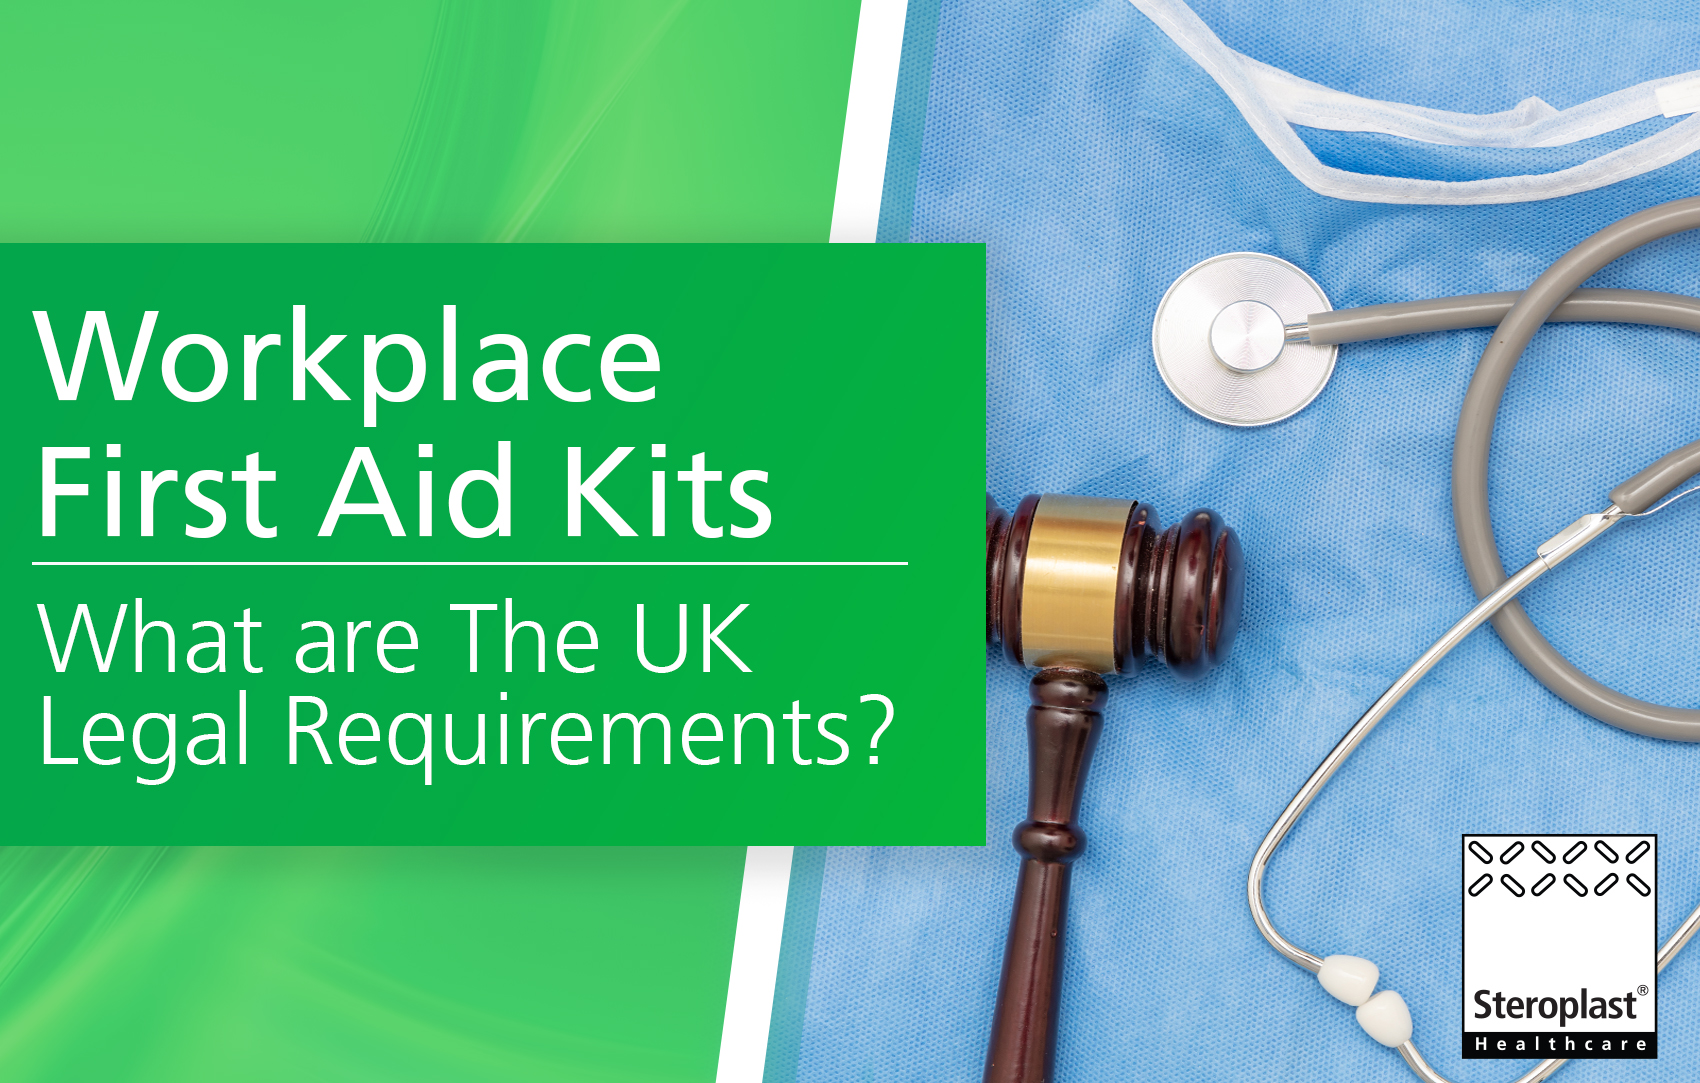 Workplace_First_Aid_Kits_What_are_The_UK_Legal_Requirements_copy_1_